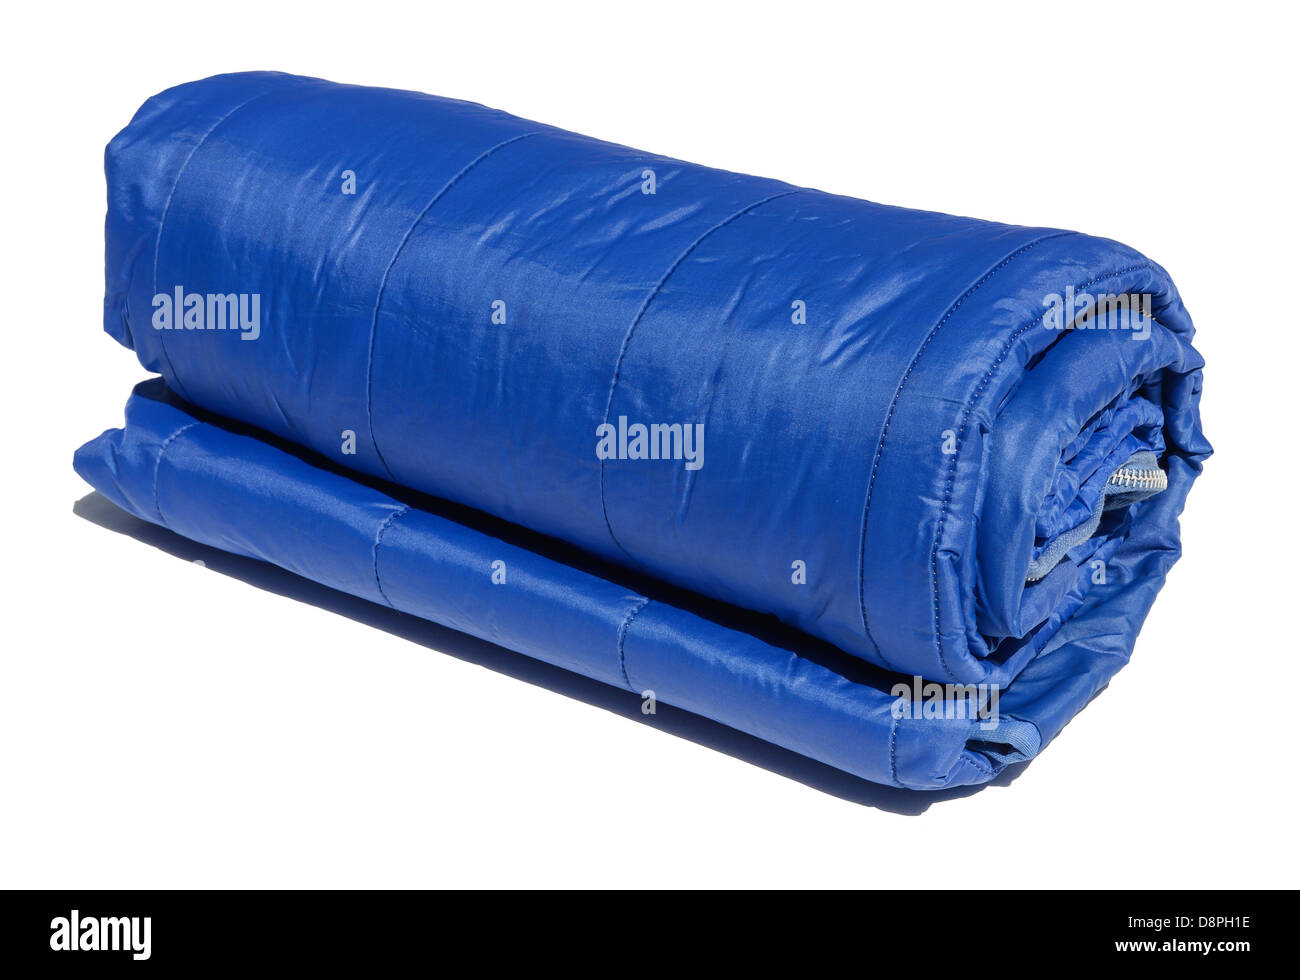 Blue sleeping bag rolled up Stock Photo